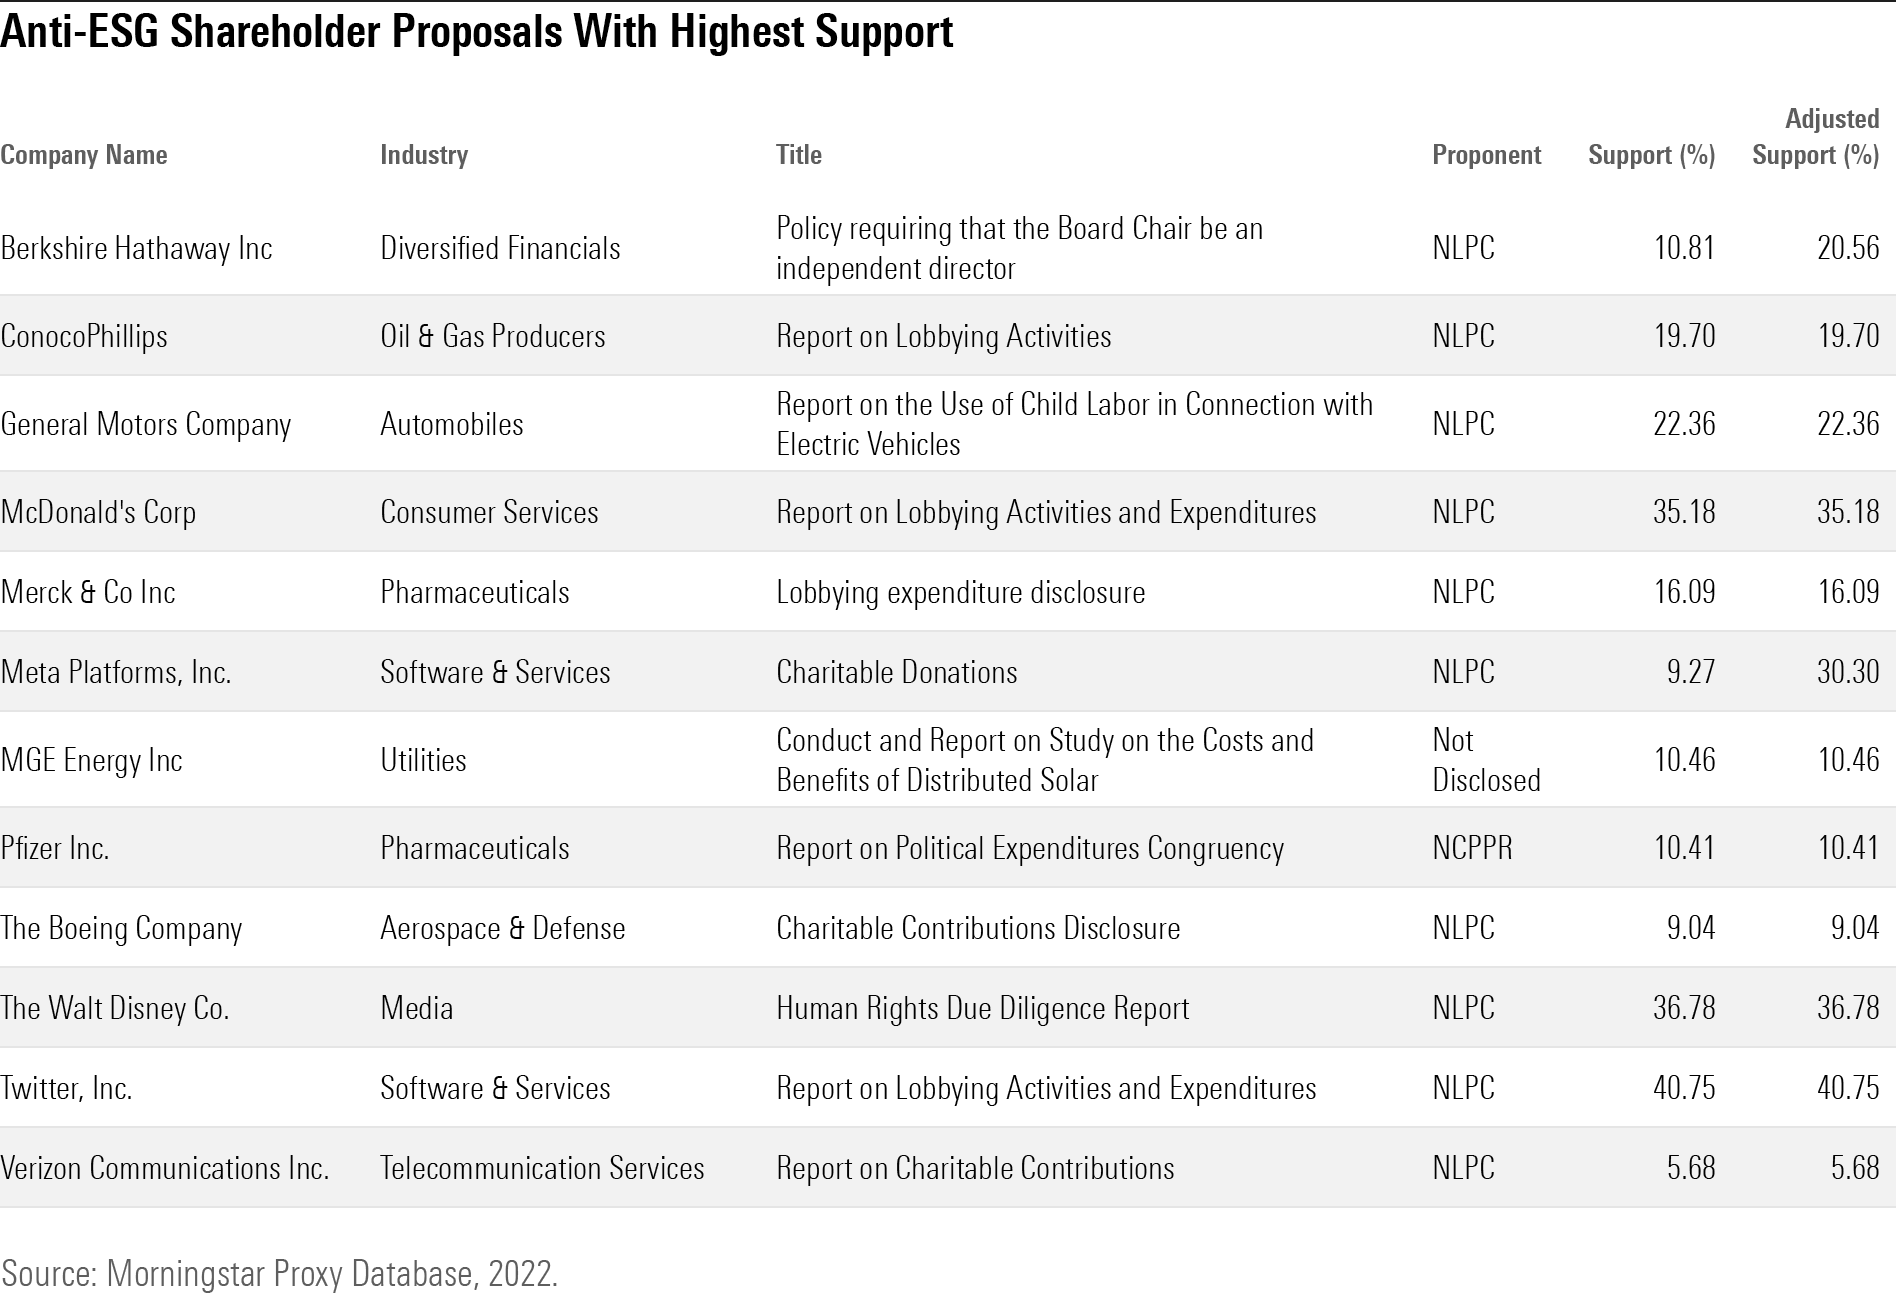 A table listing the anti-ESG shareholder proposals with the highest support.